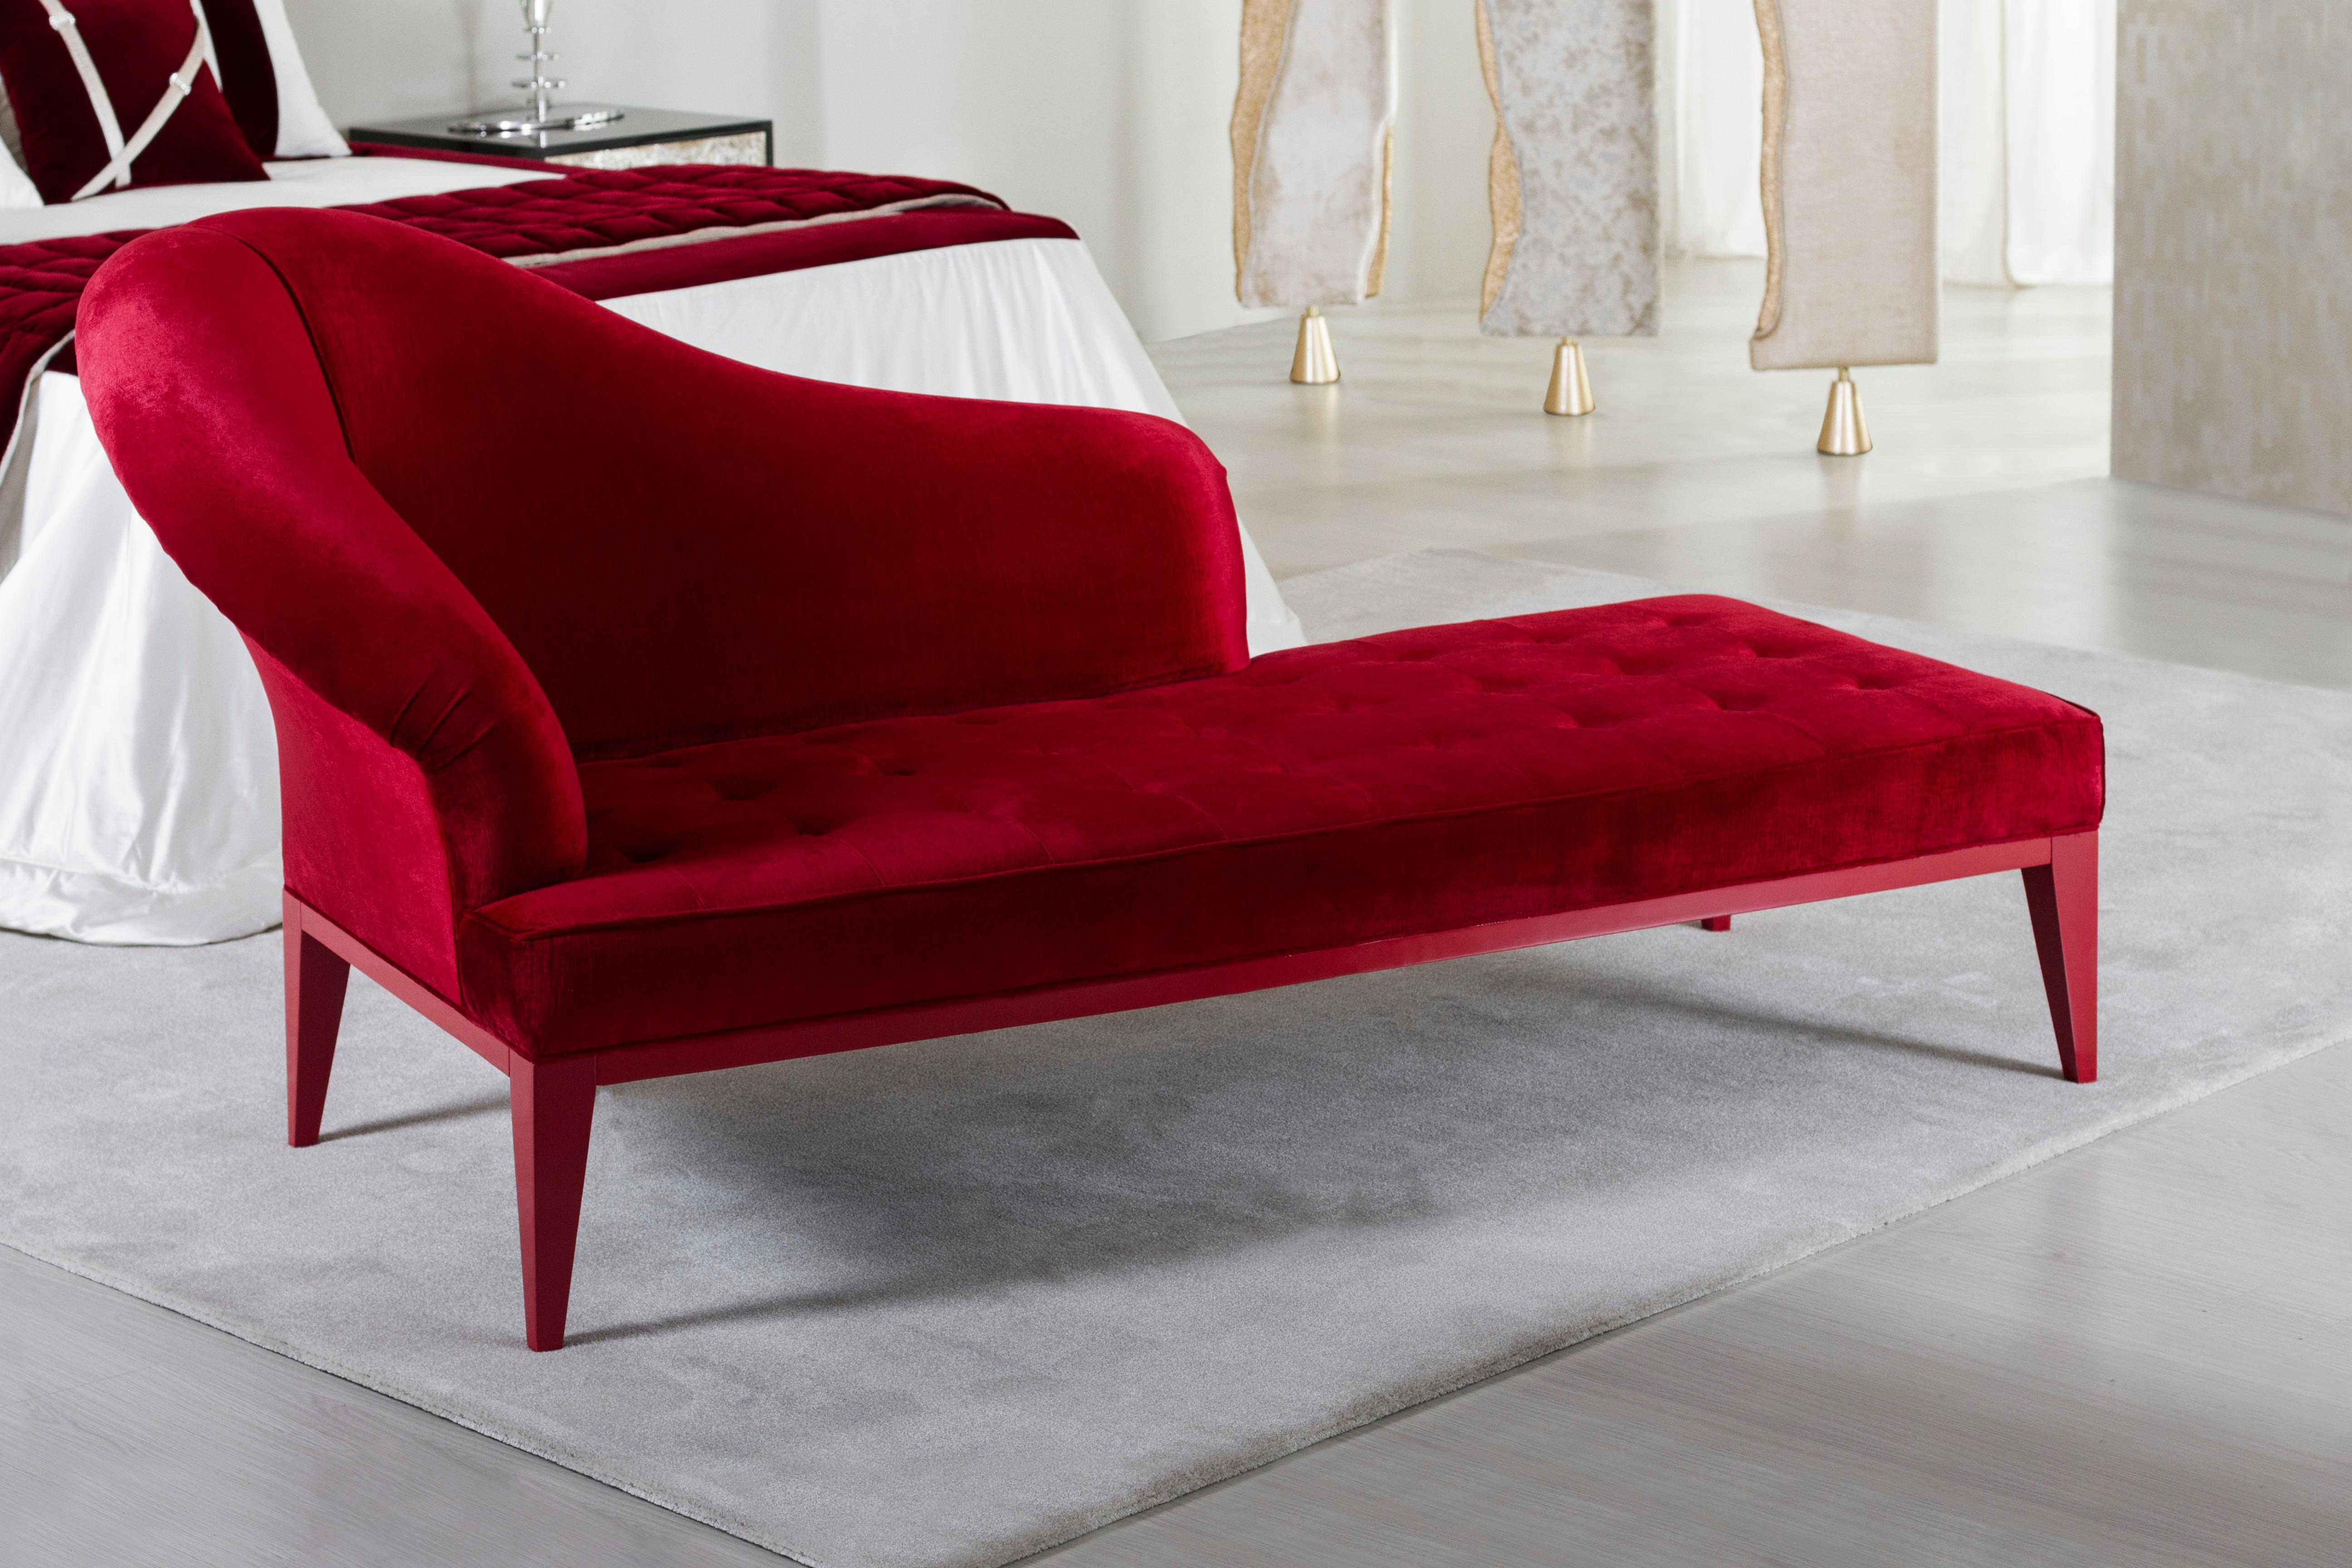 Sumy Chaise Longue, Contemporary Collection, Handcrafted in Portugal - Europe by Greenapple.

Sumy puts a modern twist on the traditional chaise longue with its strikingly curvaceous silhouette
The sumptuous upholstery in red velvet from Dedar